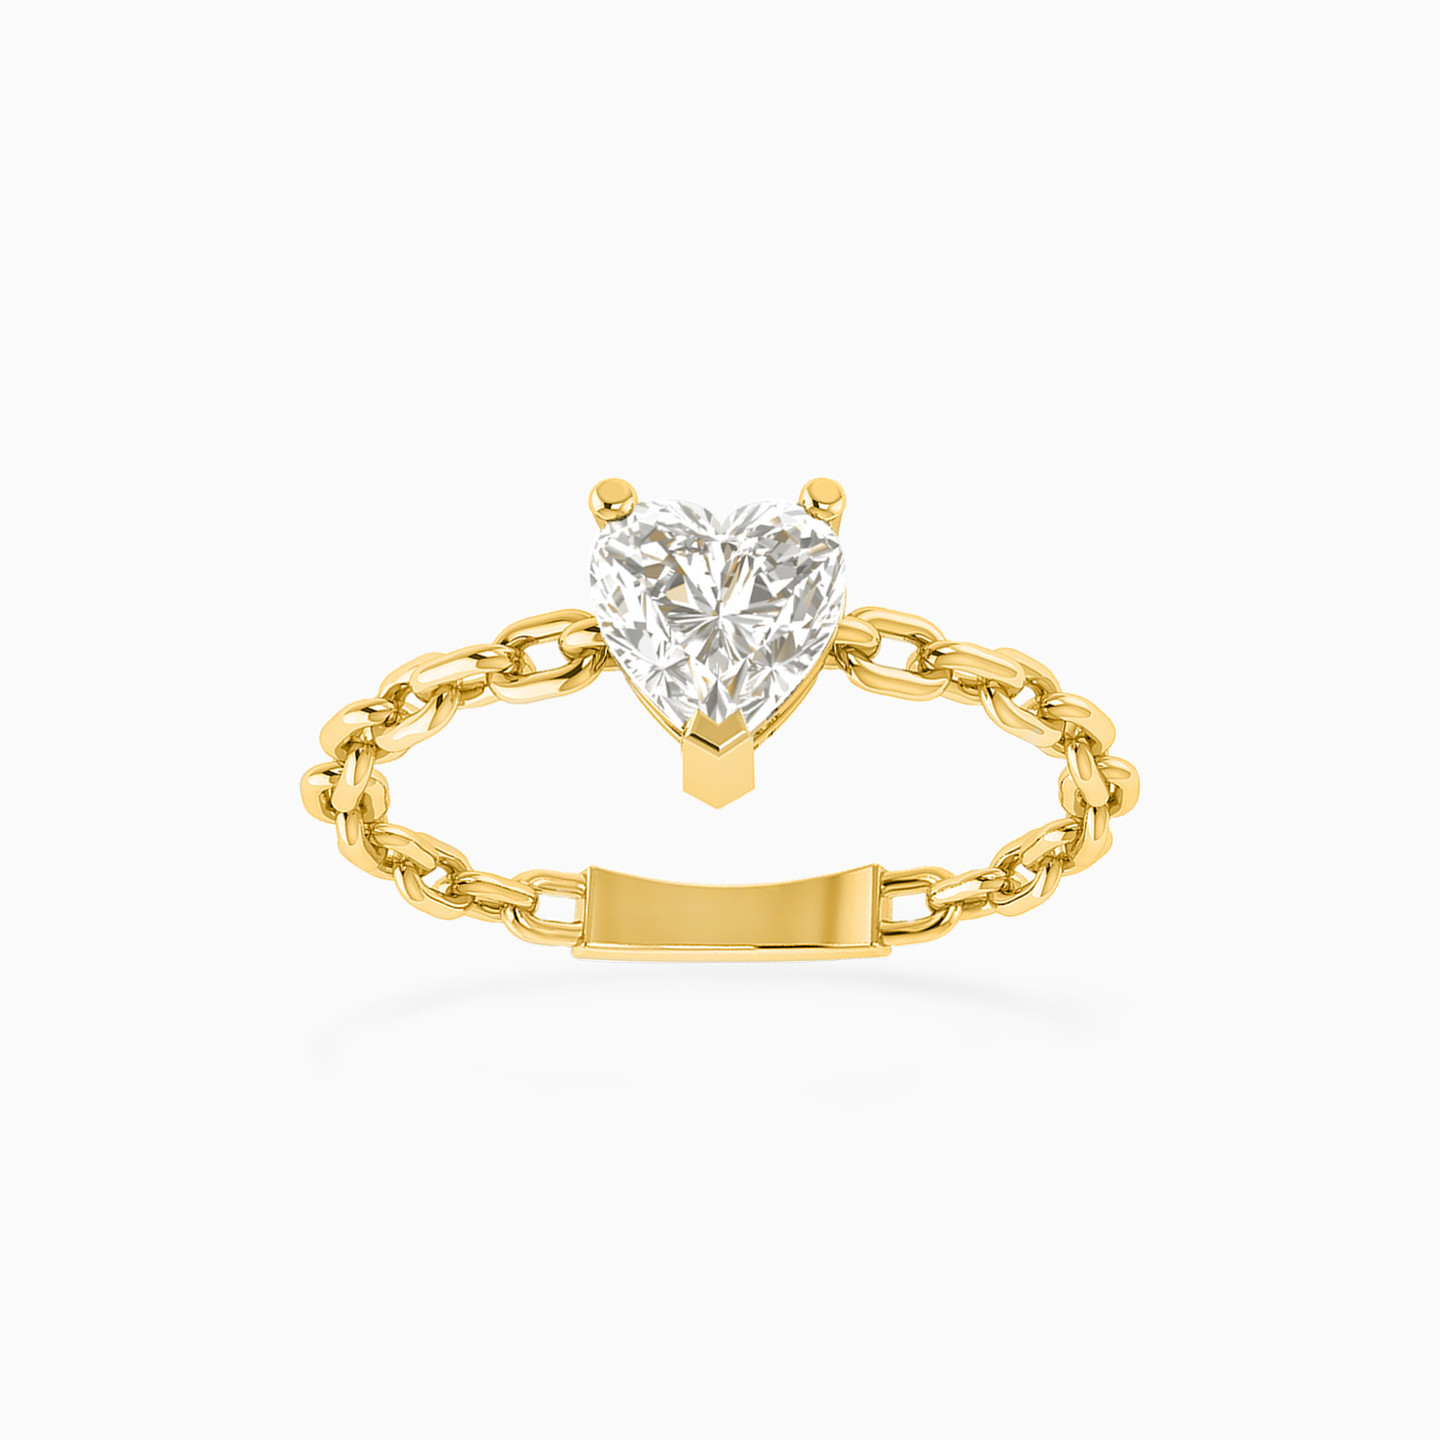 18K Gold Colored Stones Statement Ring